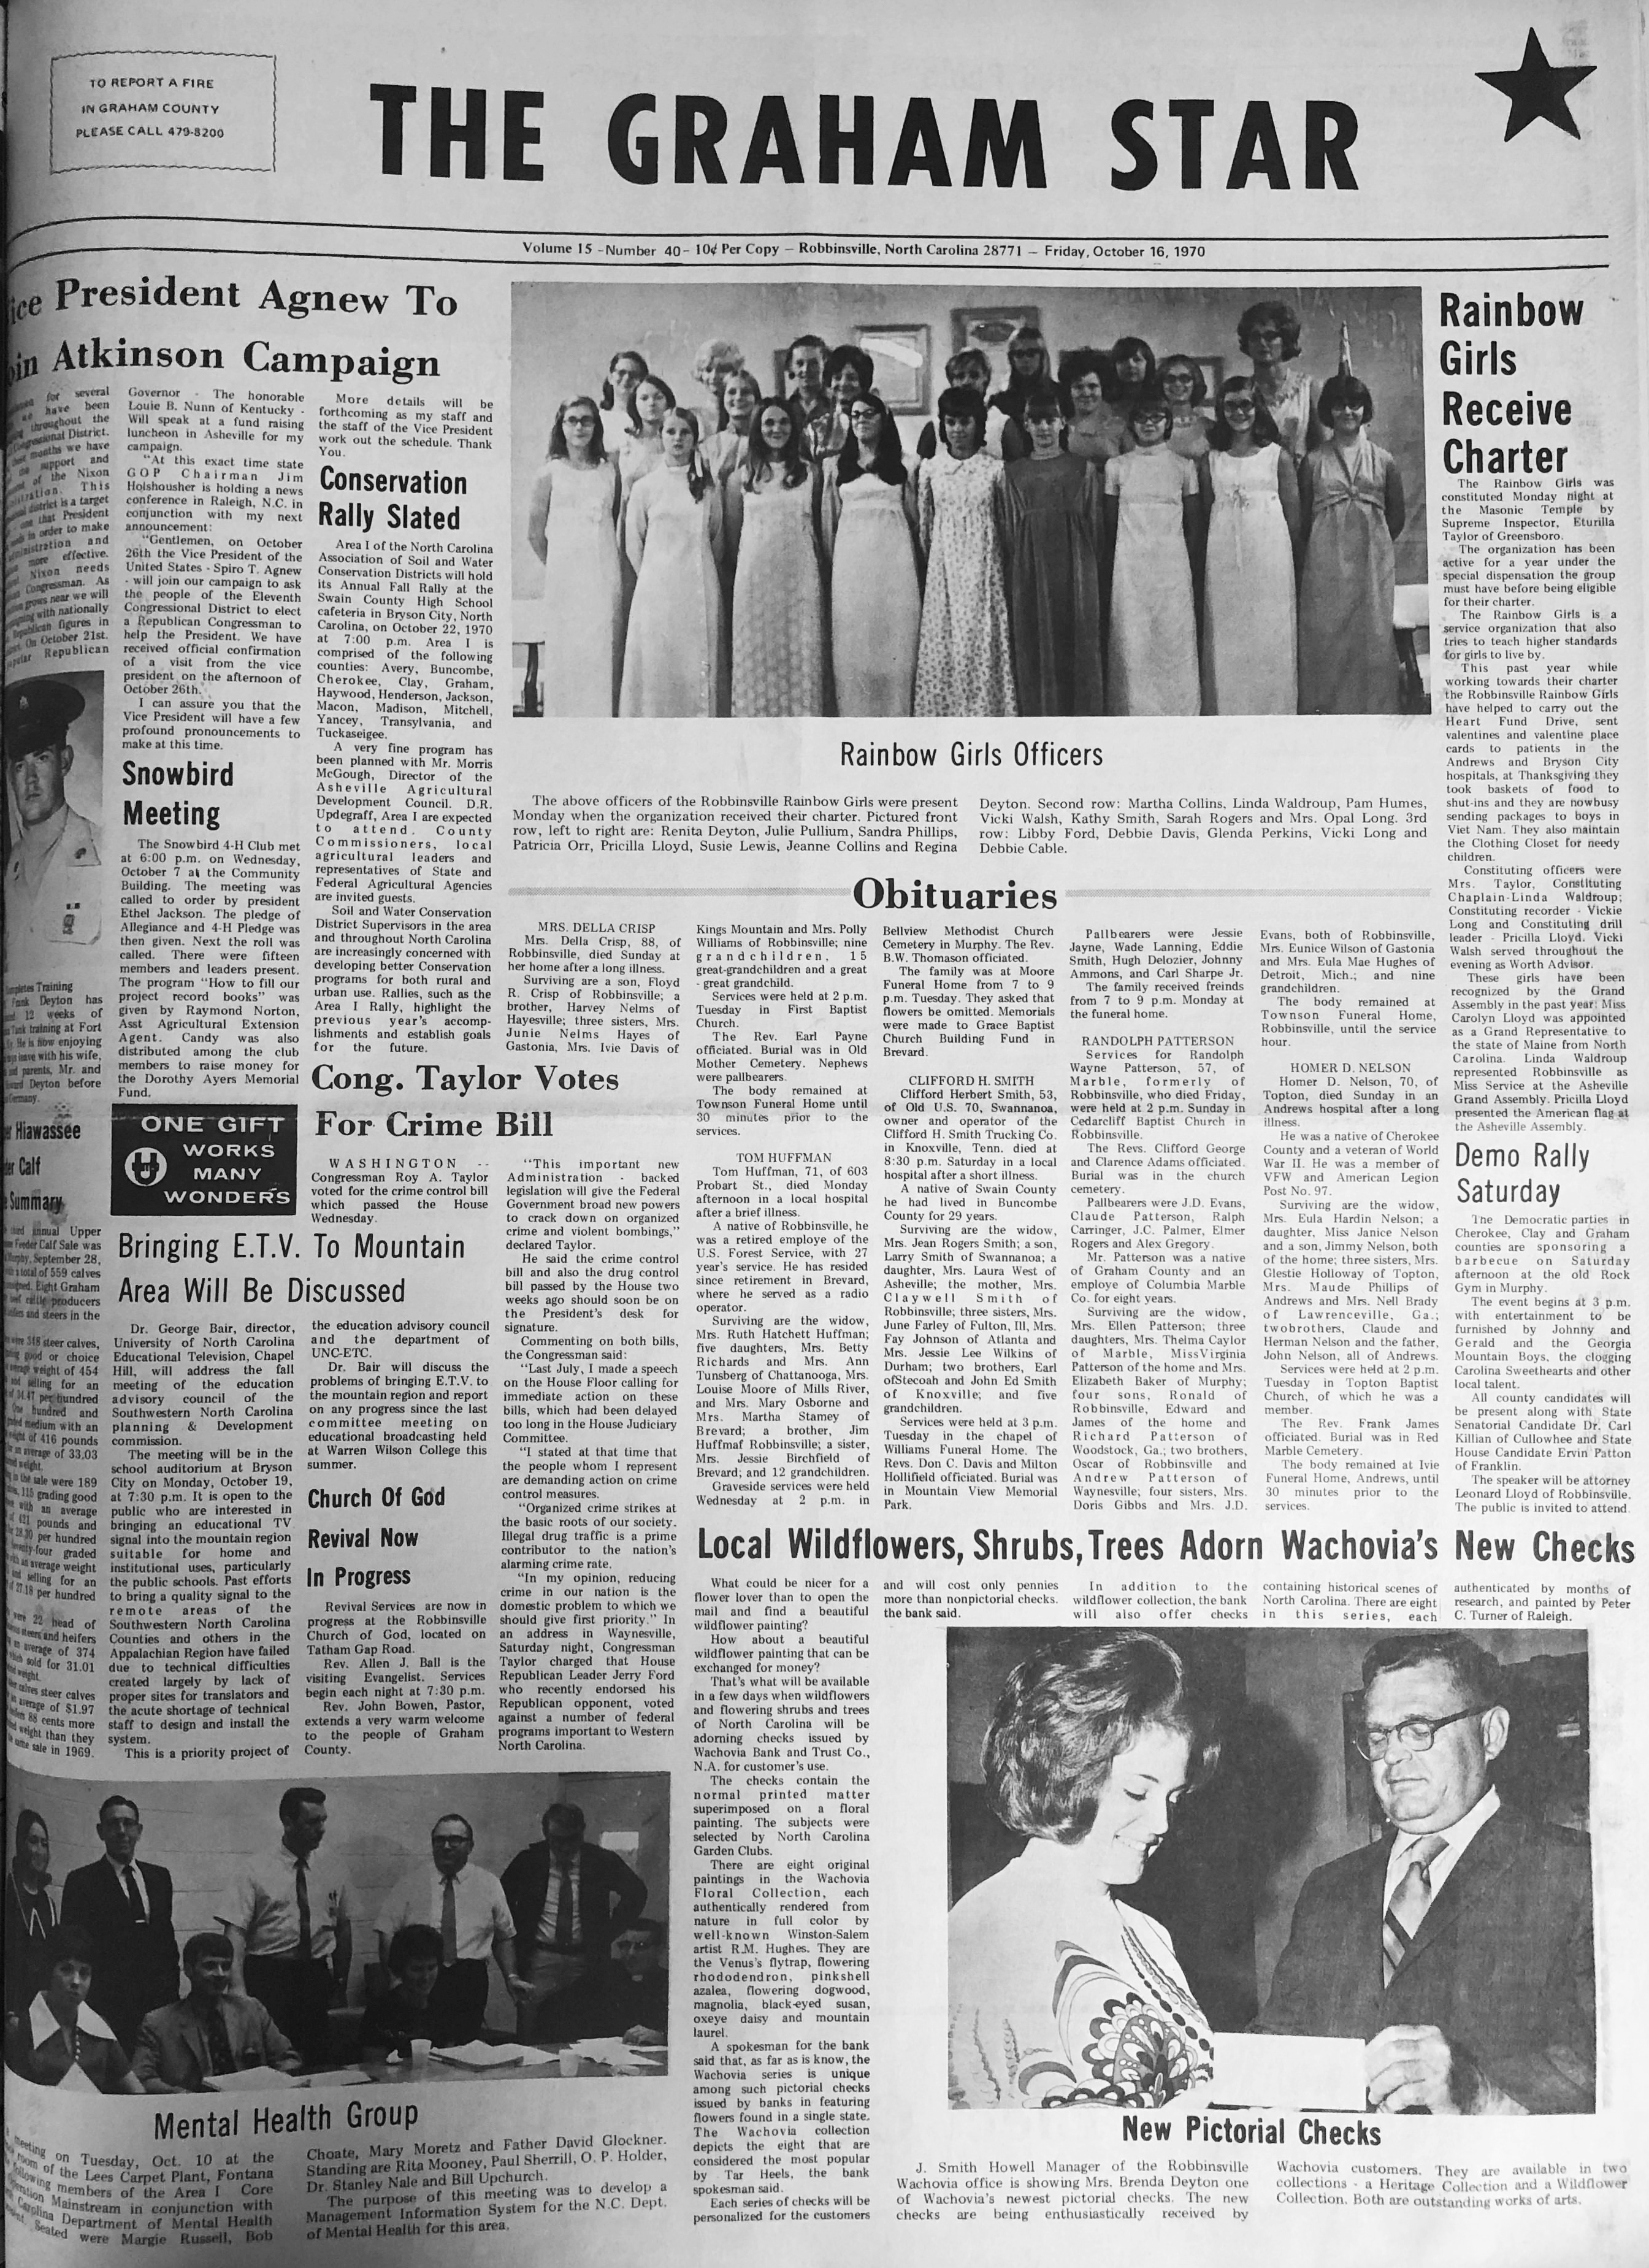 The Graham Star’s front page from 50 years ago (Oct. 16, 1970).